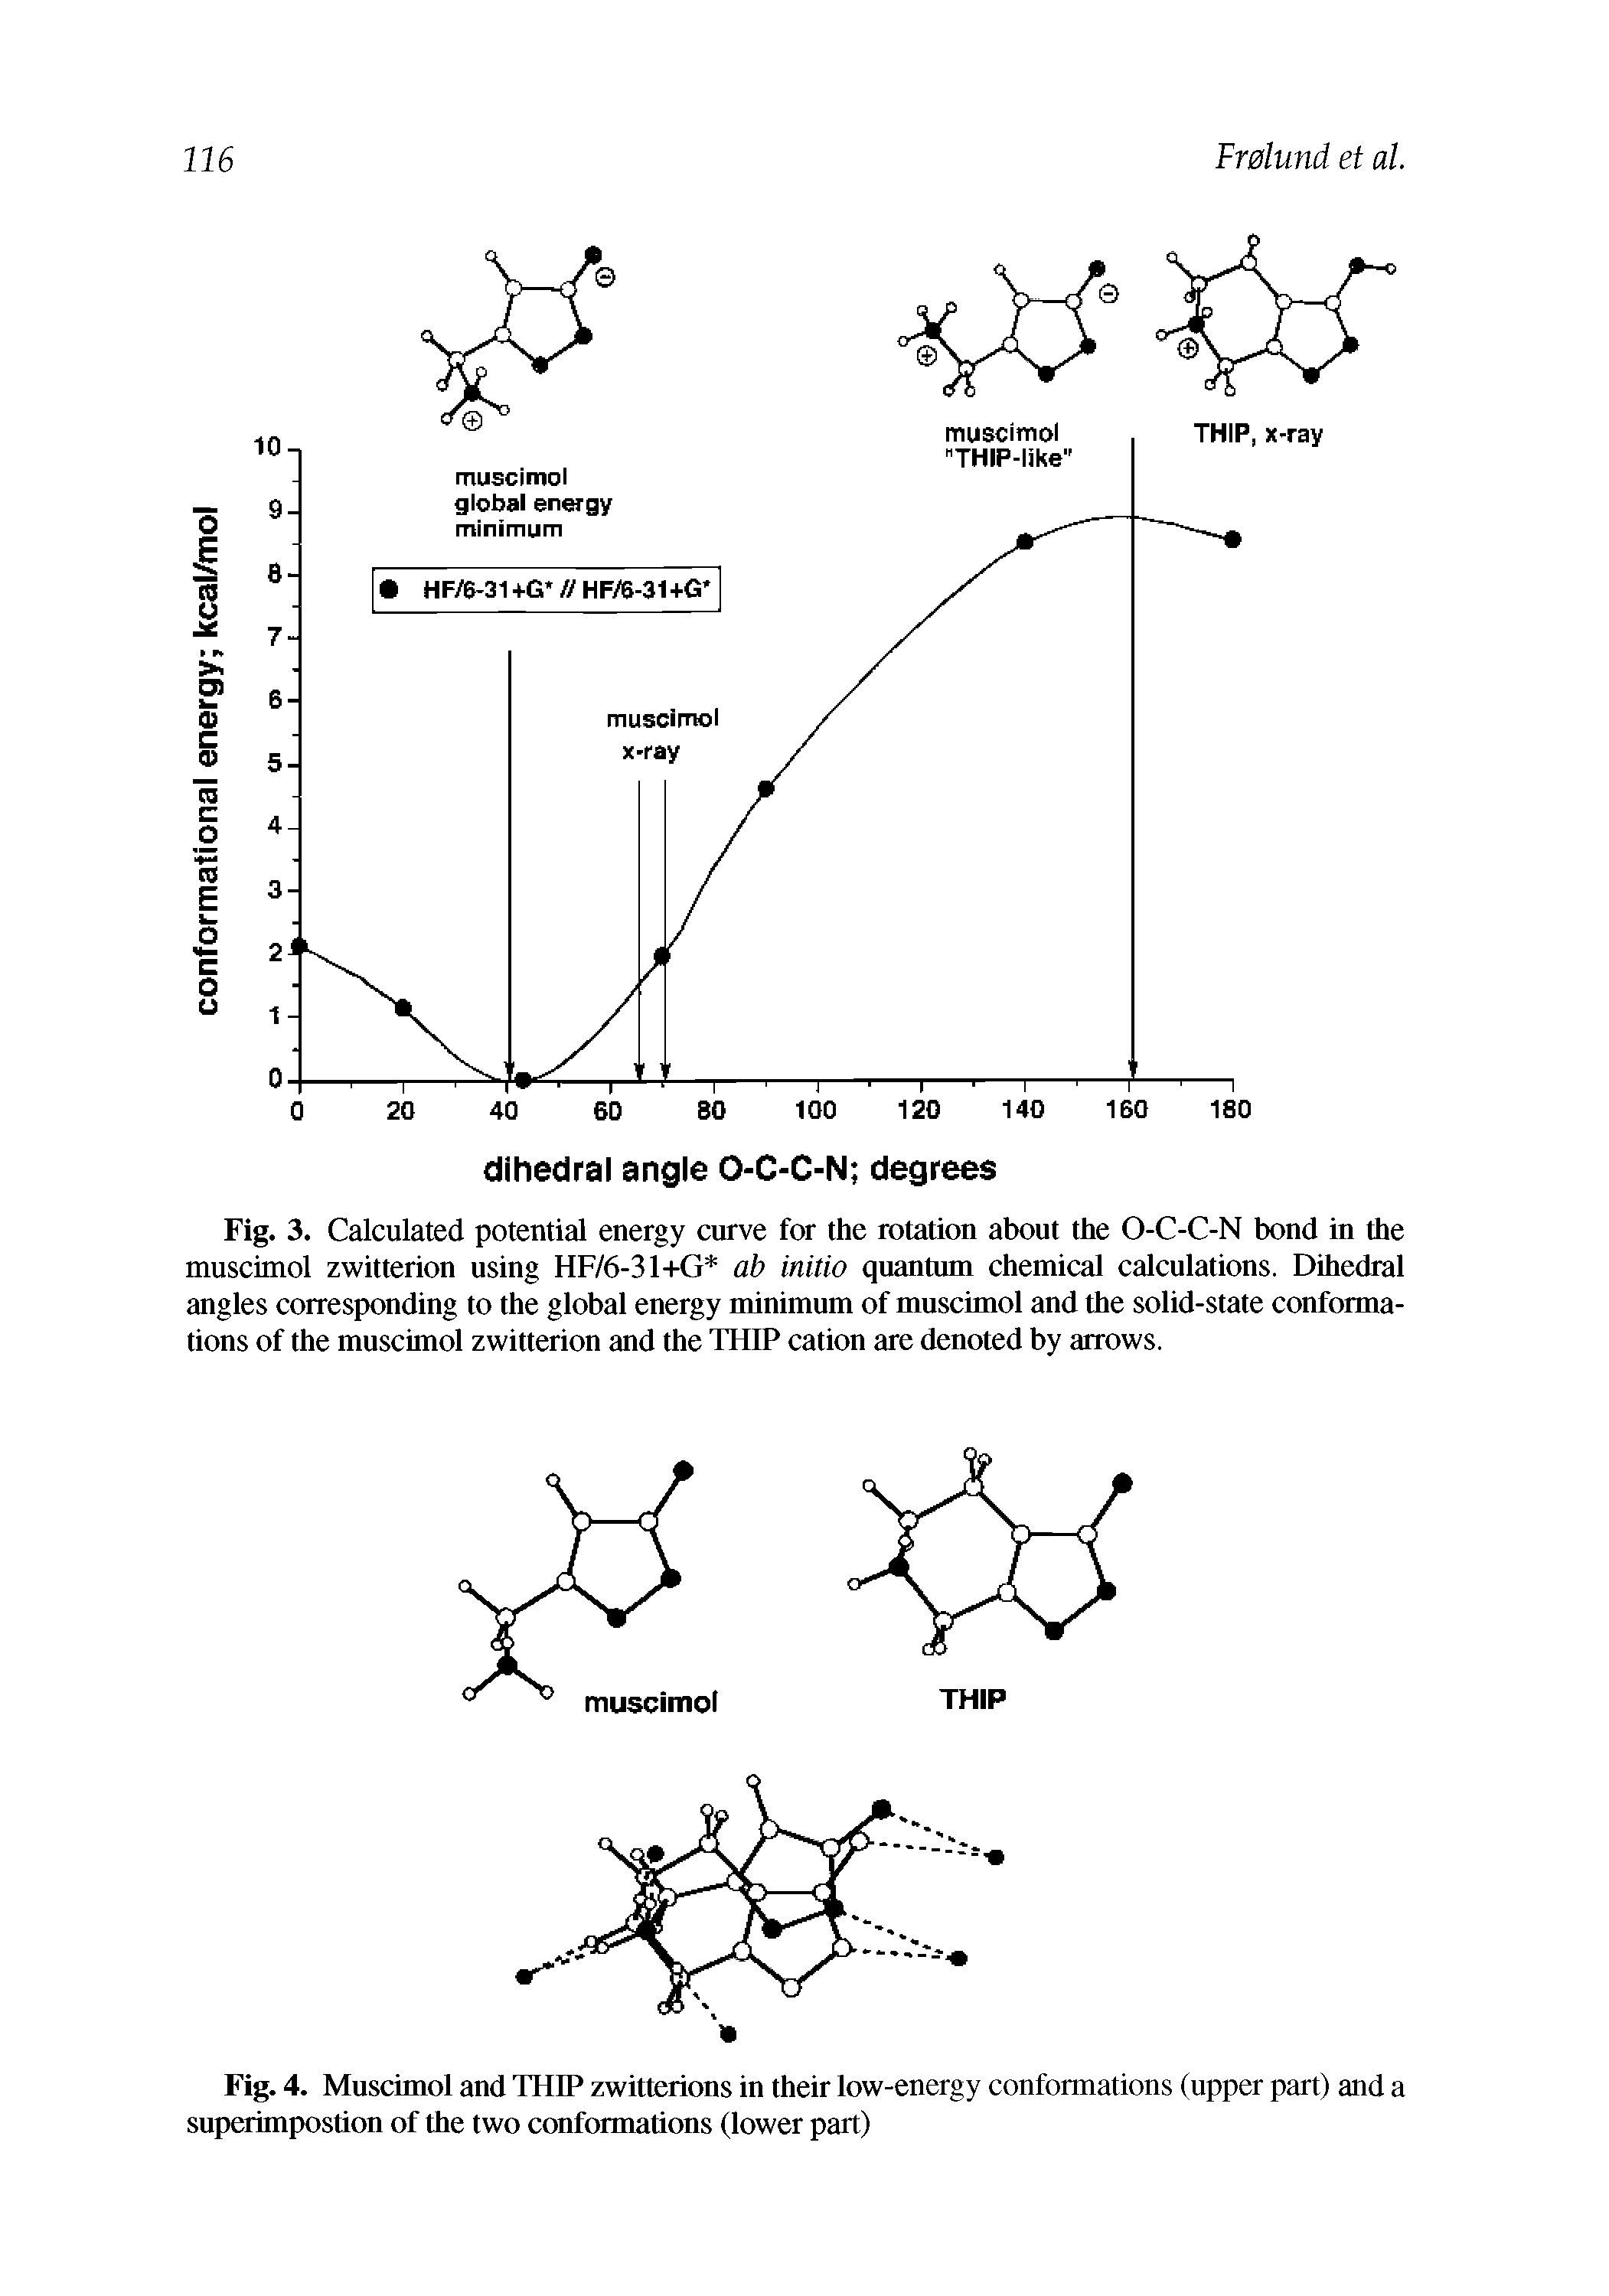 Fig. 3. Calculated potential energy curve for the rotation about the O-C-C-N bond in the muscimol zwitterion using HF/6-31+G ab initio quantum chemical calculations. Dihedral angles corresponding to the global energy minimum of muscimol and the solid-state conformations of the muscimol zwitterion and the THIP cation are denoted by arrows.